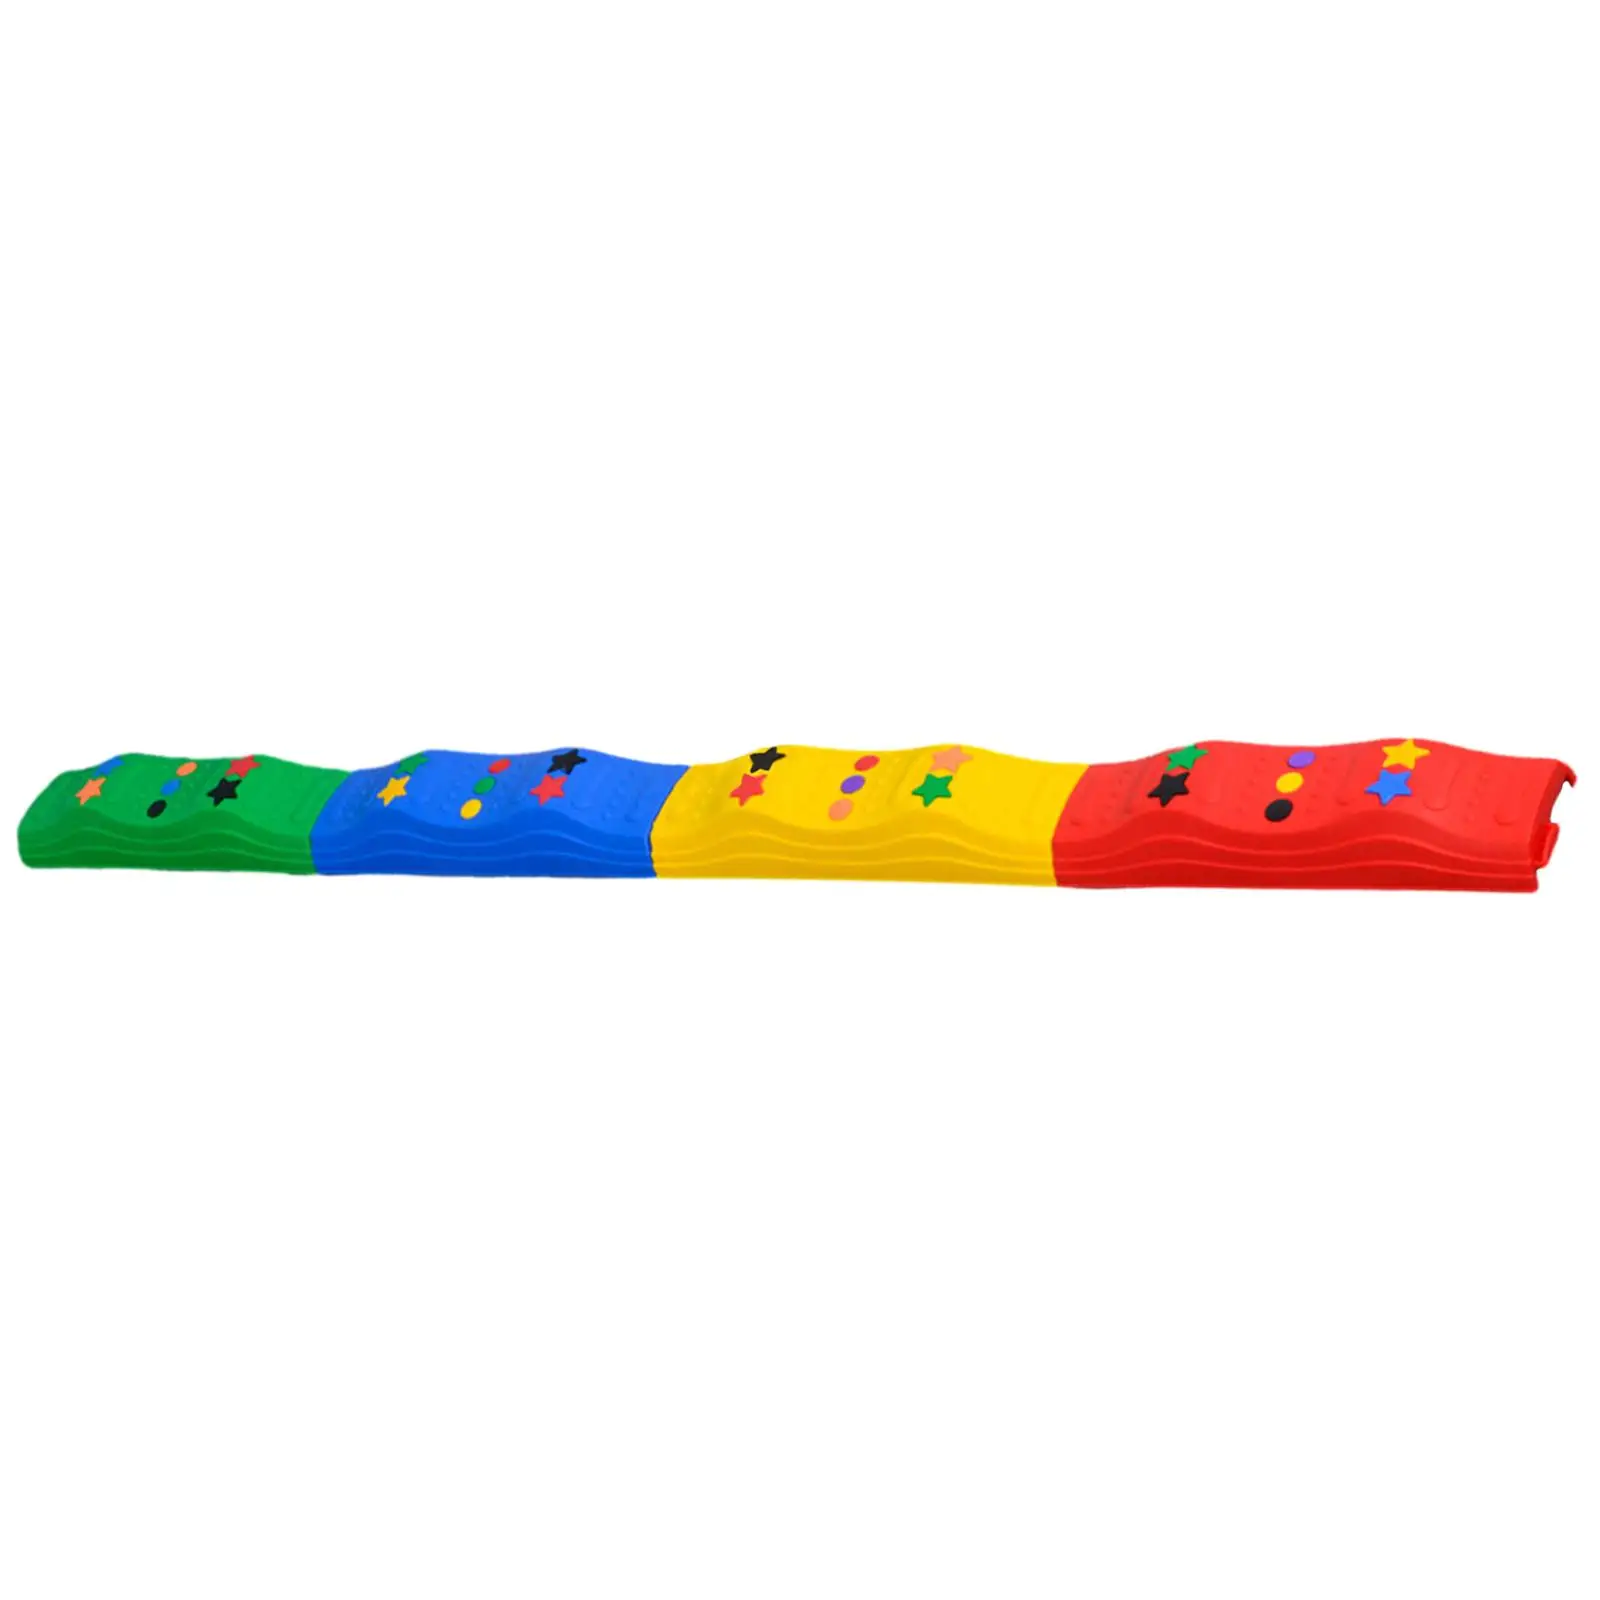 Colored Balance Beams Anit Skid Promote Agility Strength Backyard Sensory Play Build Coordination and Confidence Obstacle Course